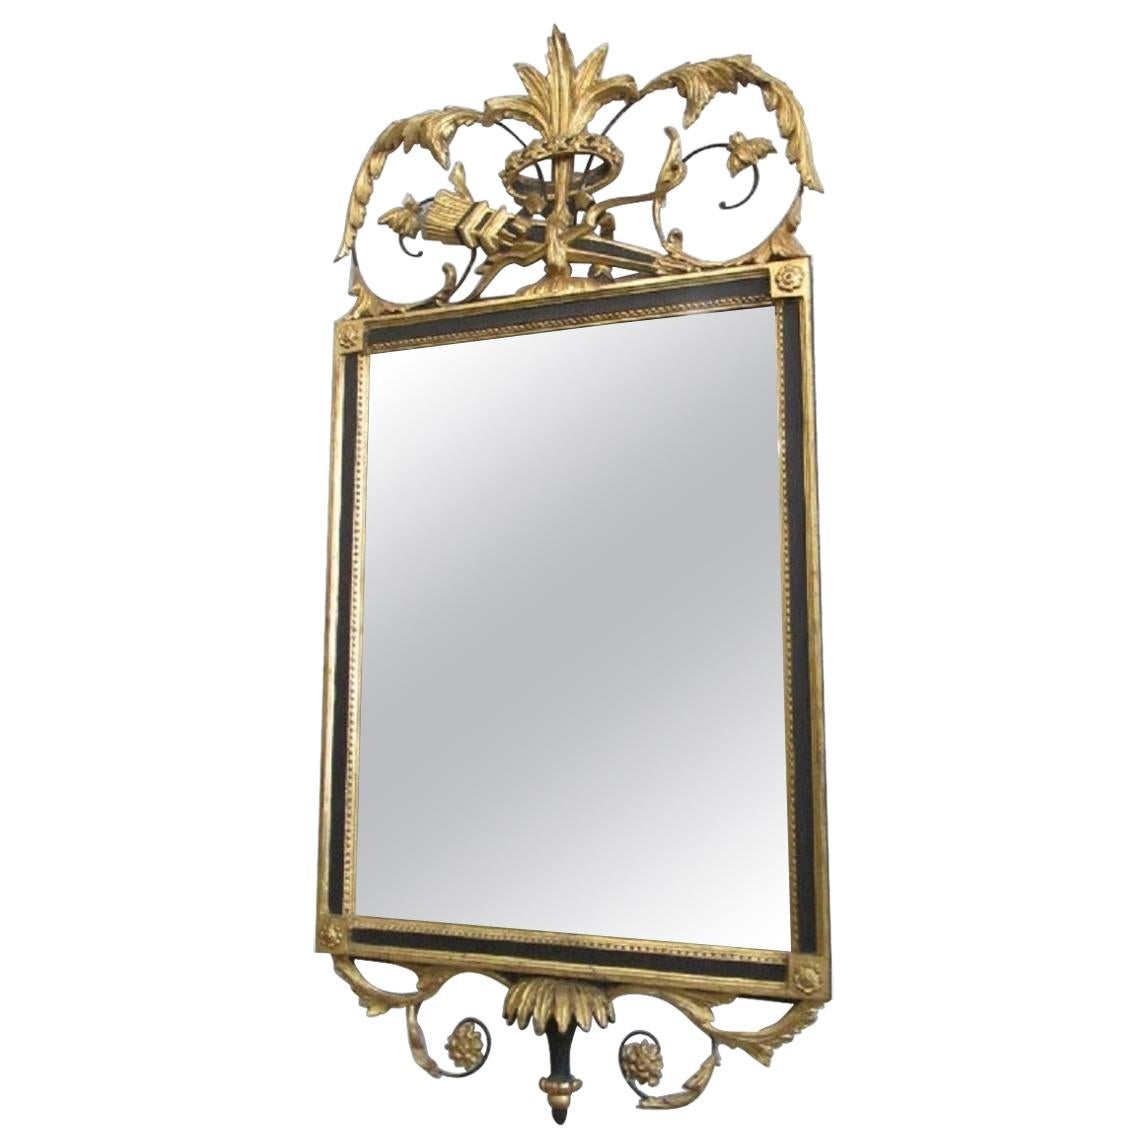 Neoclassical Italian Gold Leaf Mirror with Wood Frame